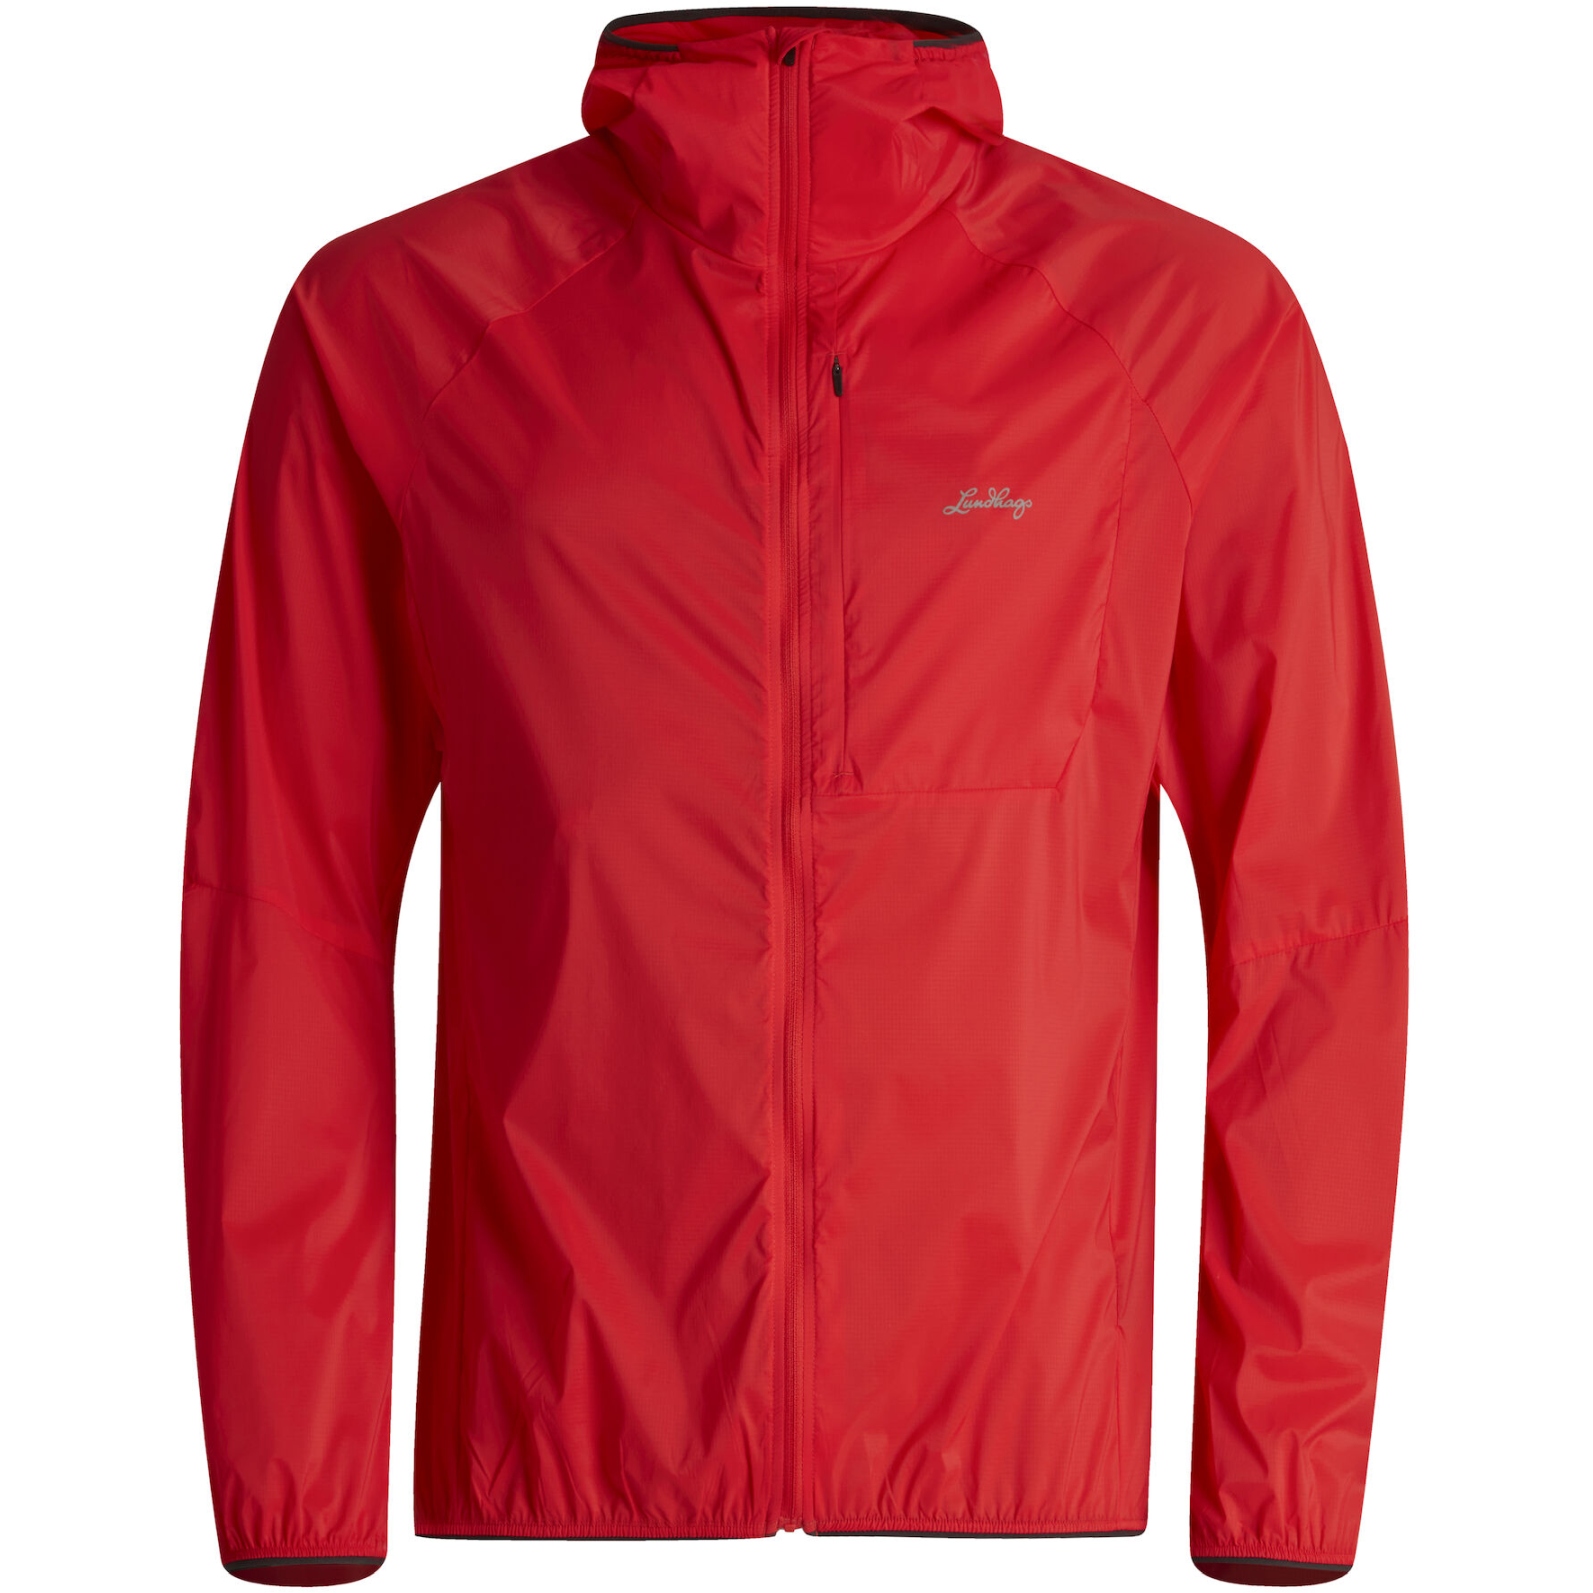 Picture of Lundhags Tived Light Wind Jacket Men - Lively Red 250